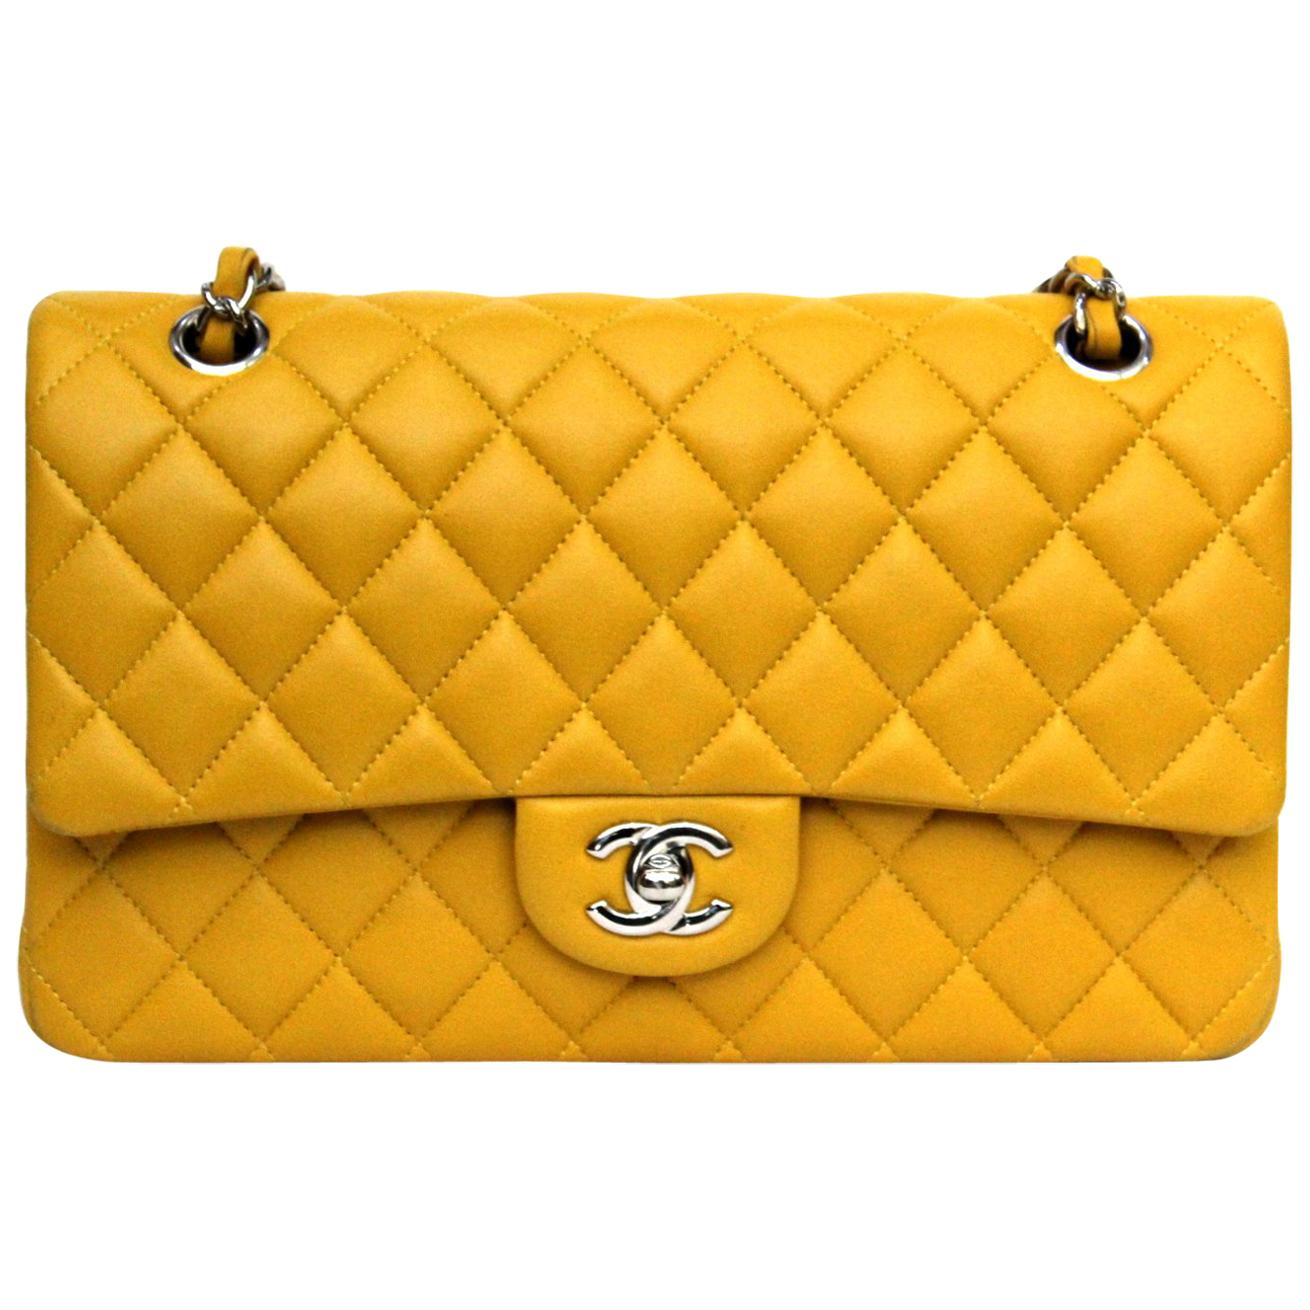 Chanel Yellow Leather 2.55 Double Flap Bag